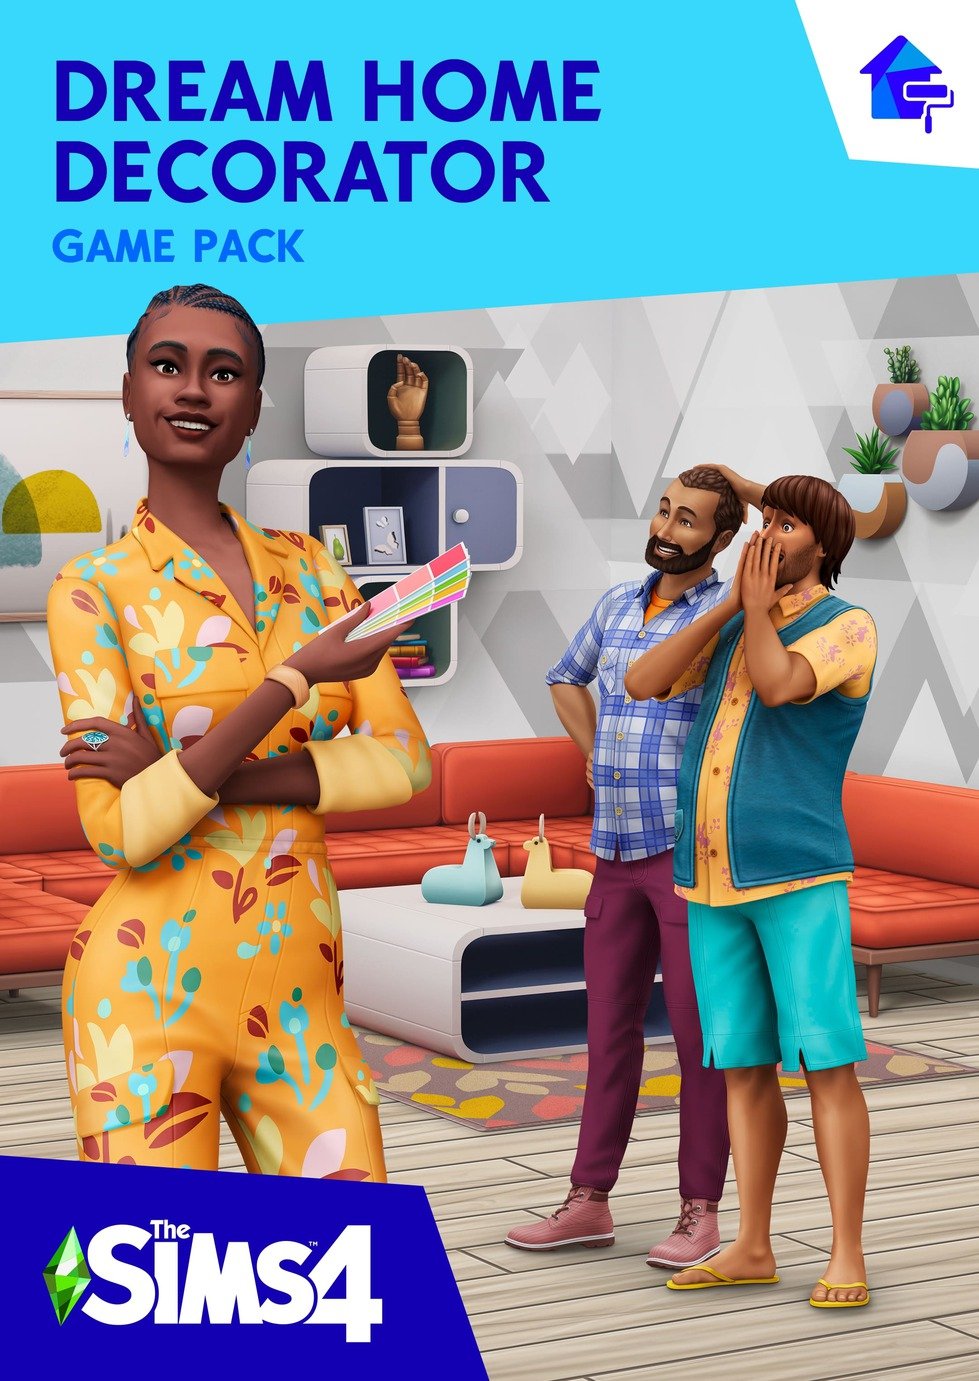 The Sims 4 Dream Home Decorator Game Pack PC Game